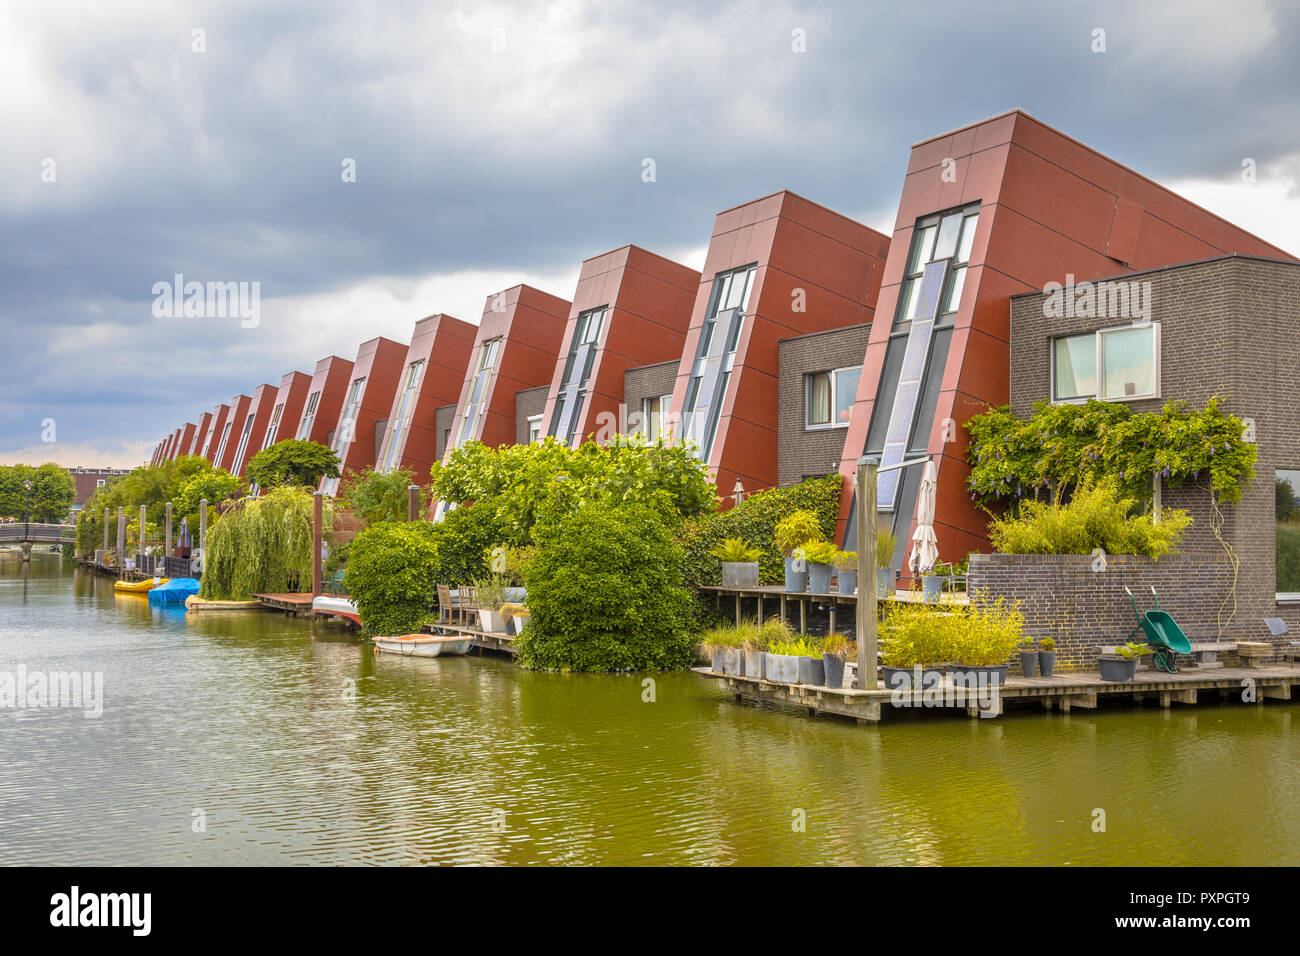 Ecological houses with integrated solar panels and hanging gardens on waterfront in urban area of The Hague, Netherlands Stock Photo